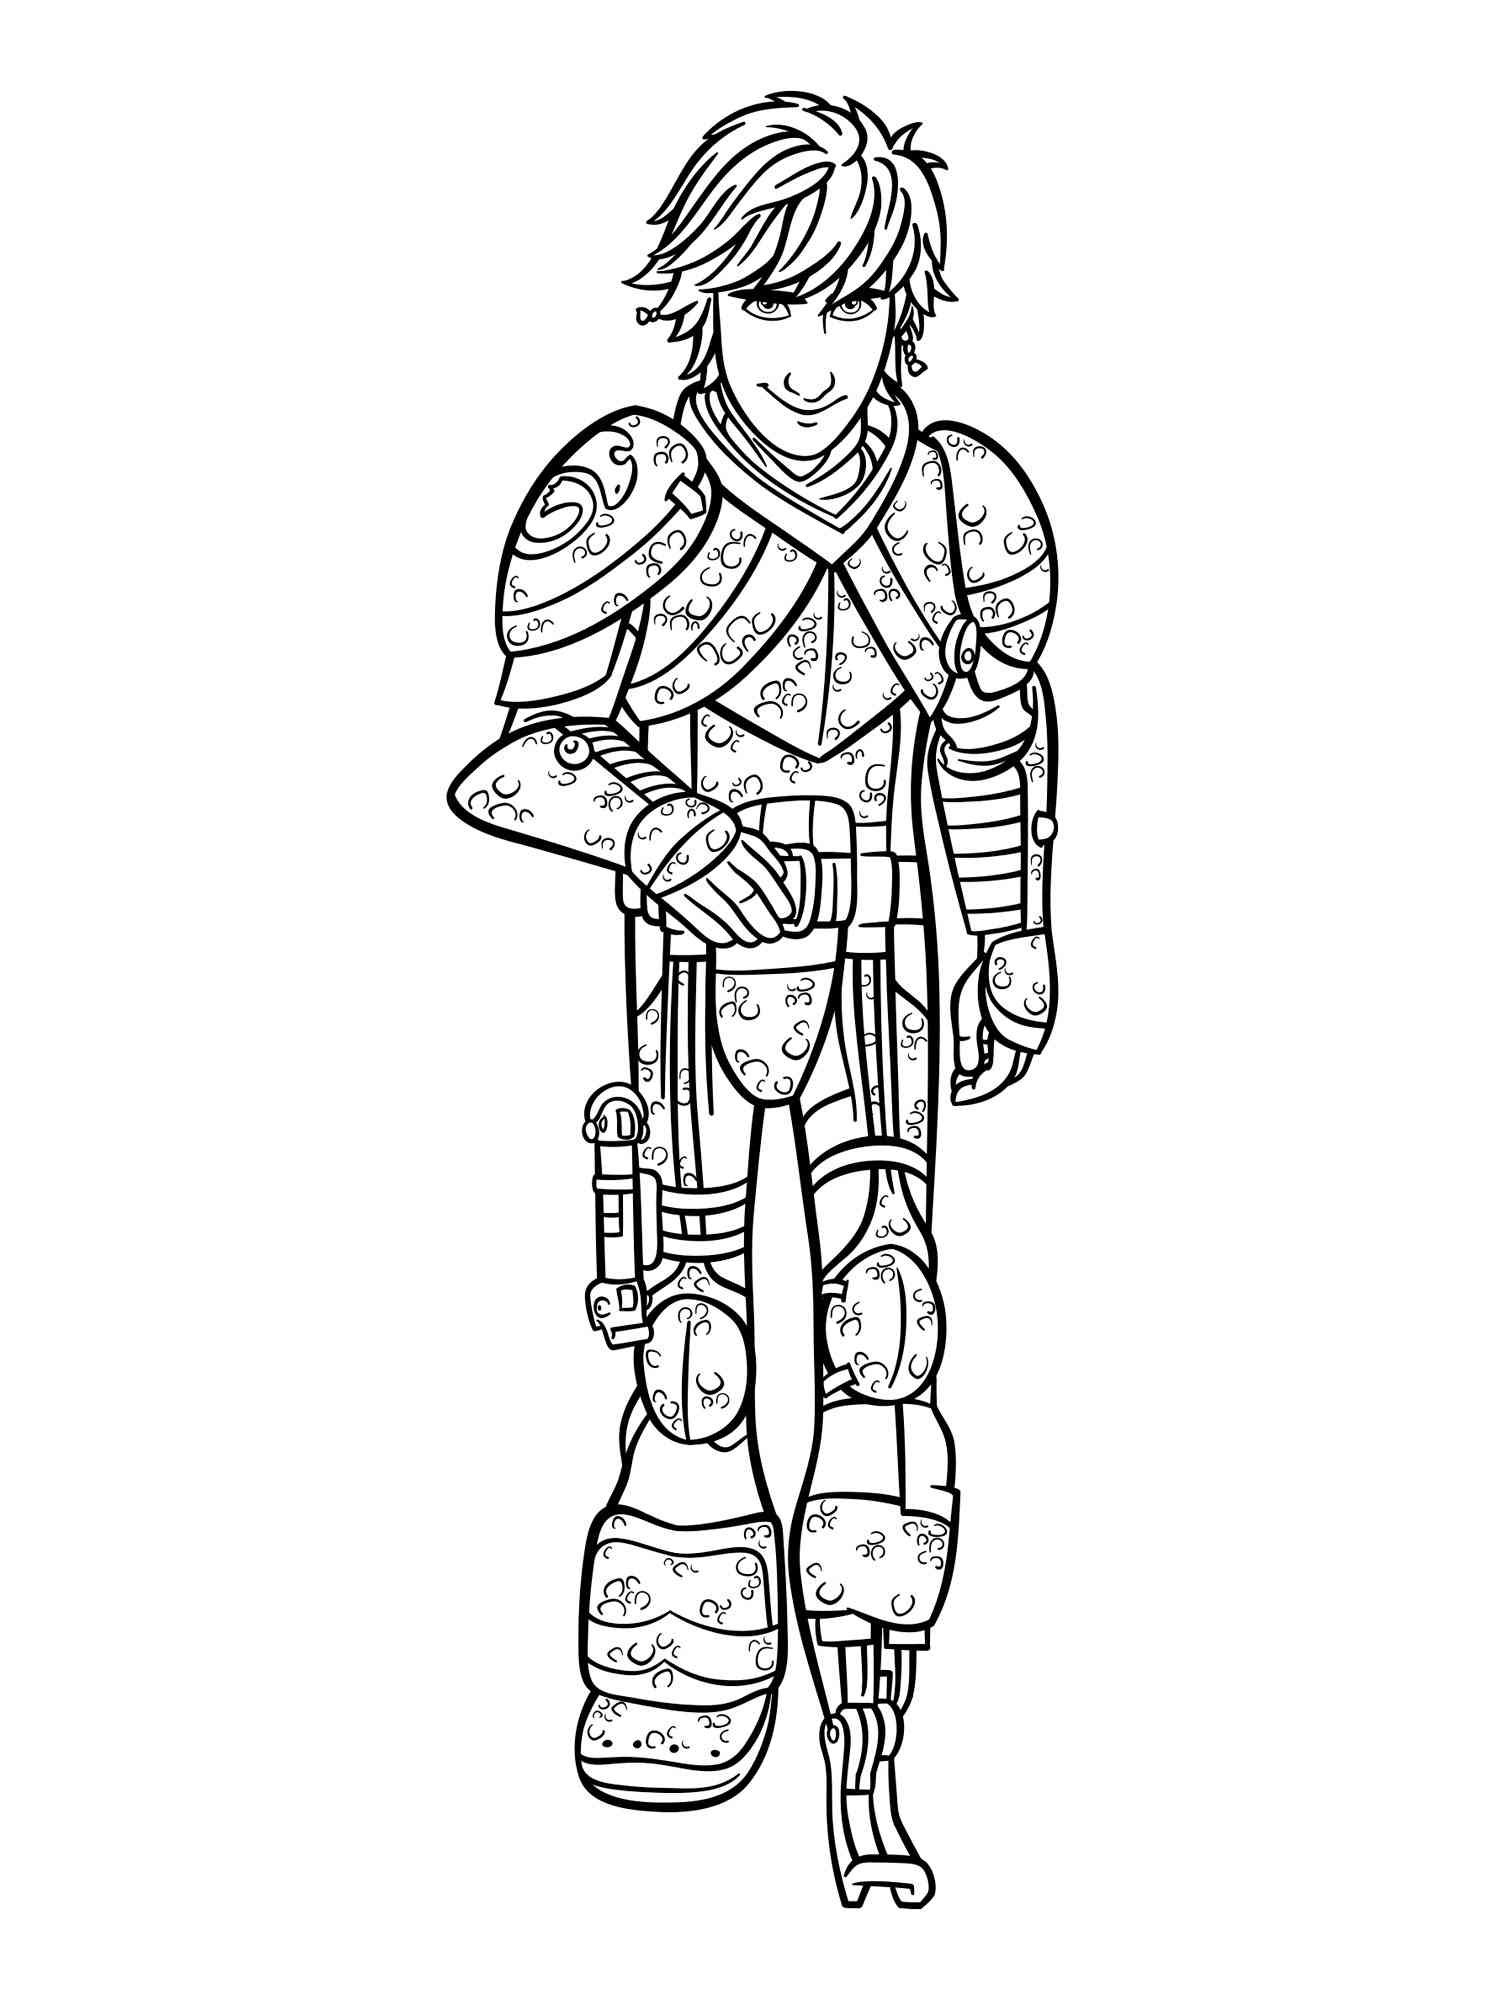 Hiccup 9 coloring page